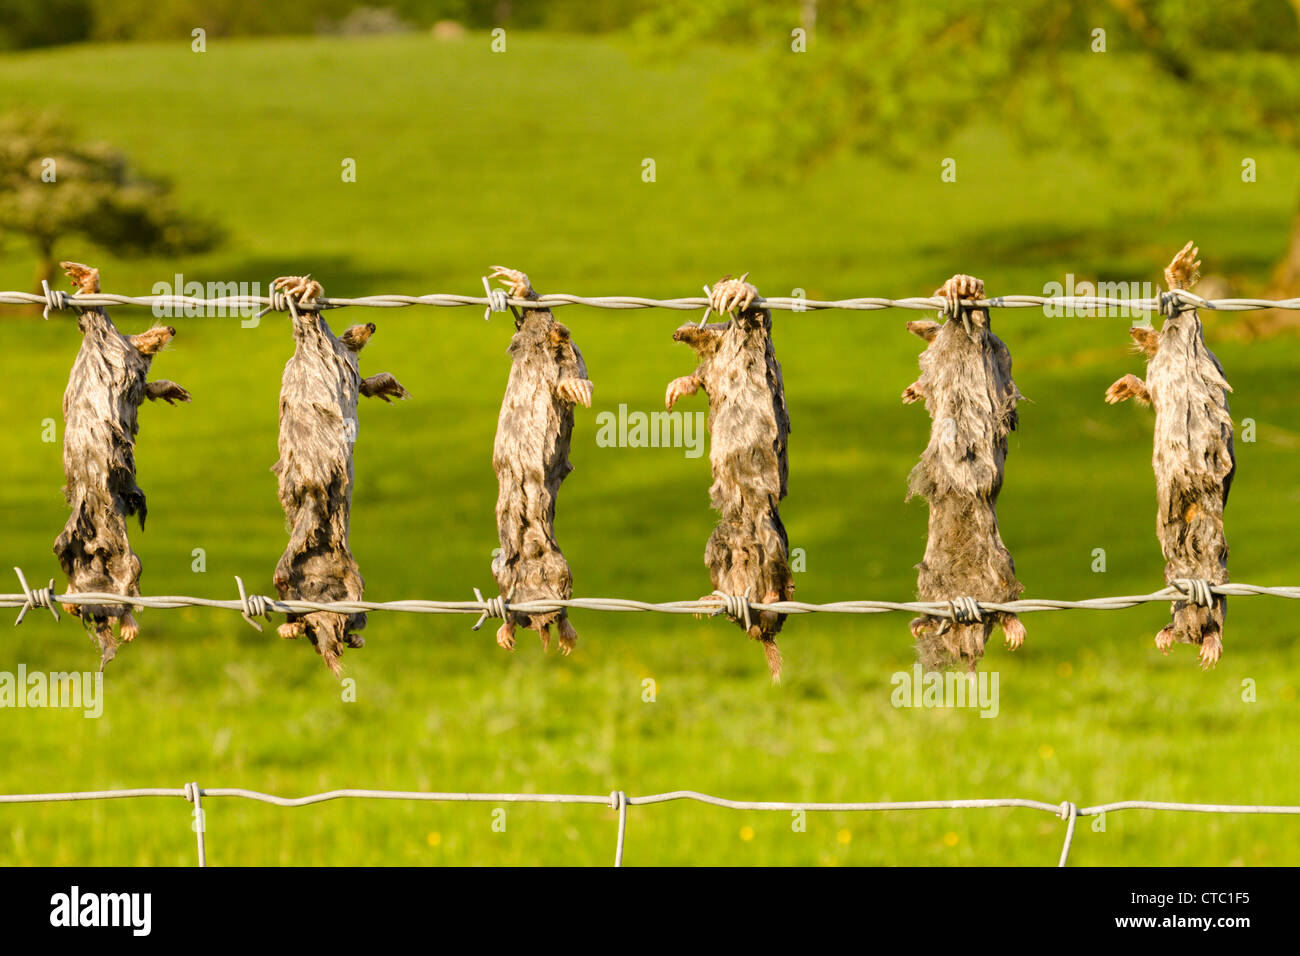 Dead moles strung up on barbed wire Stock Photo